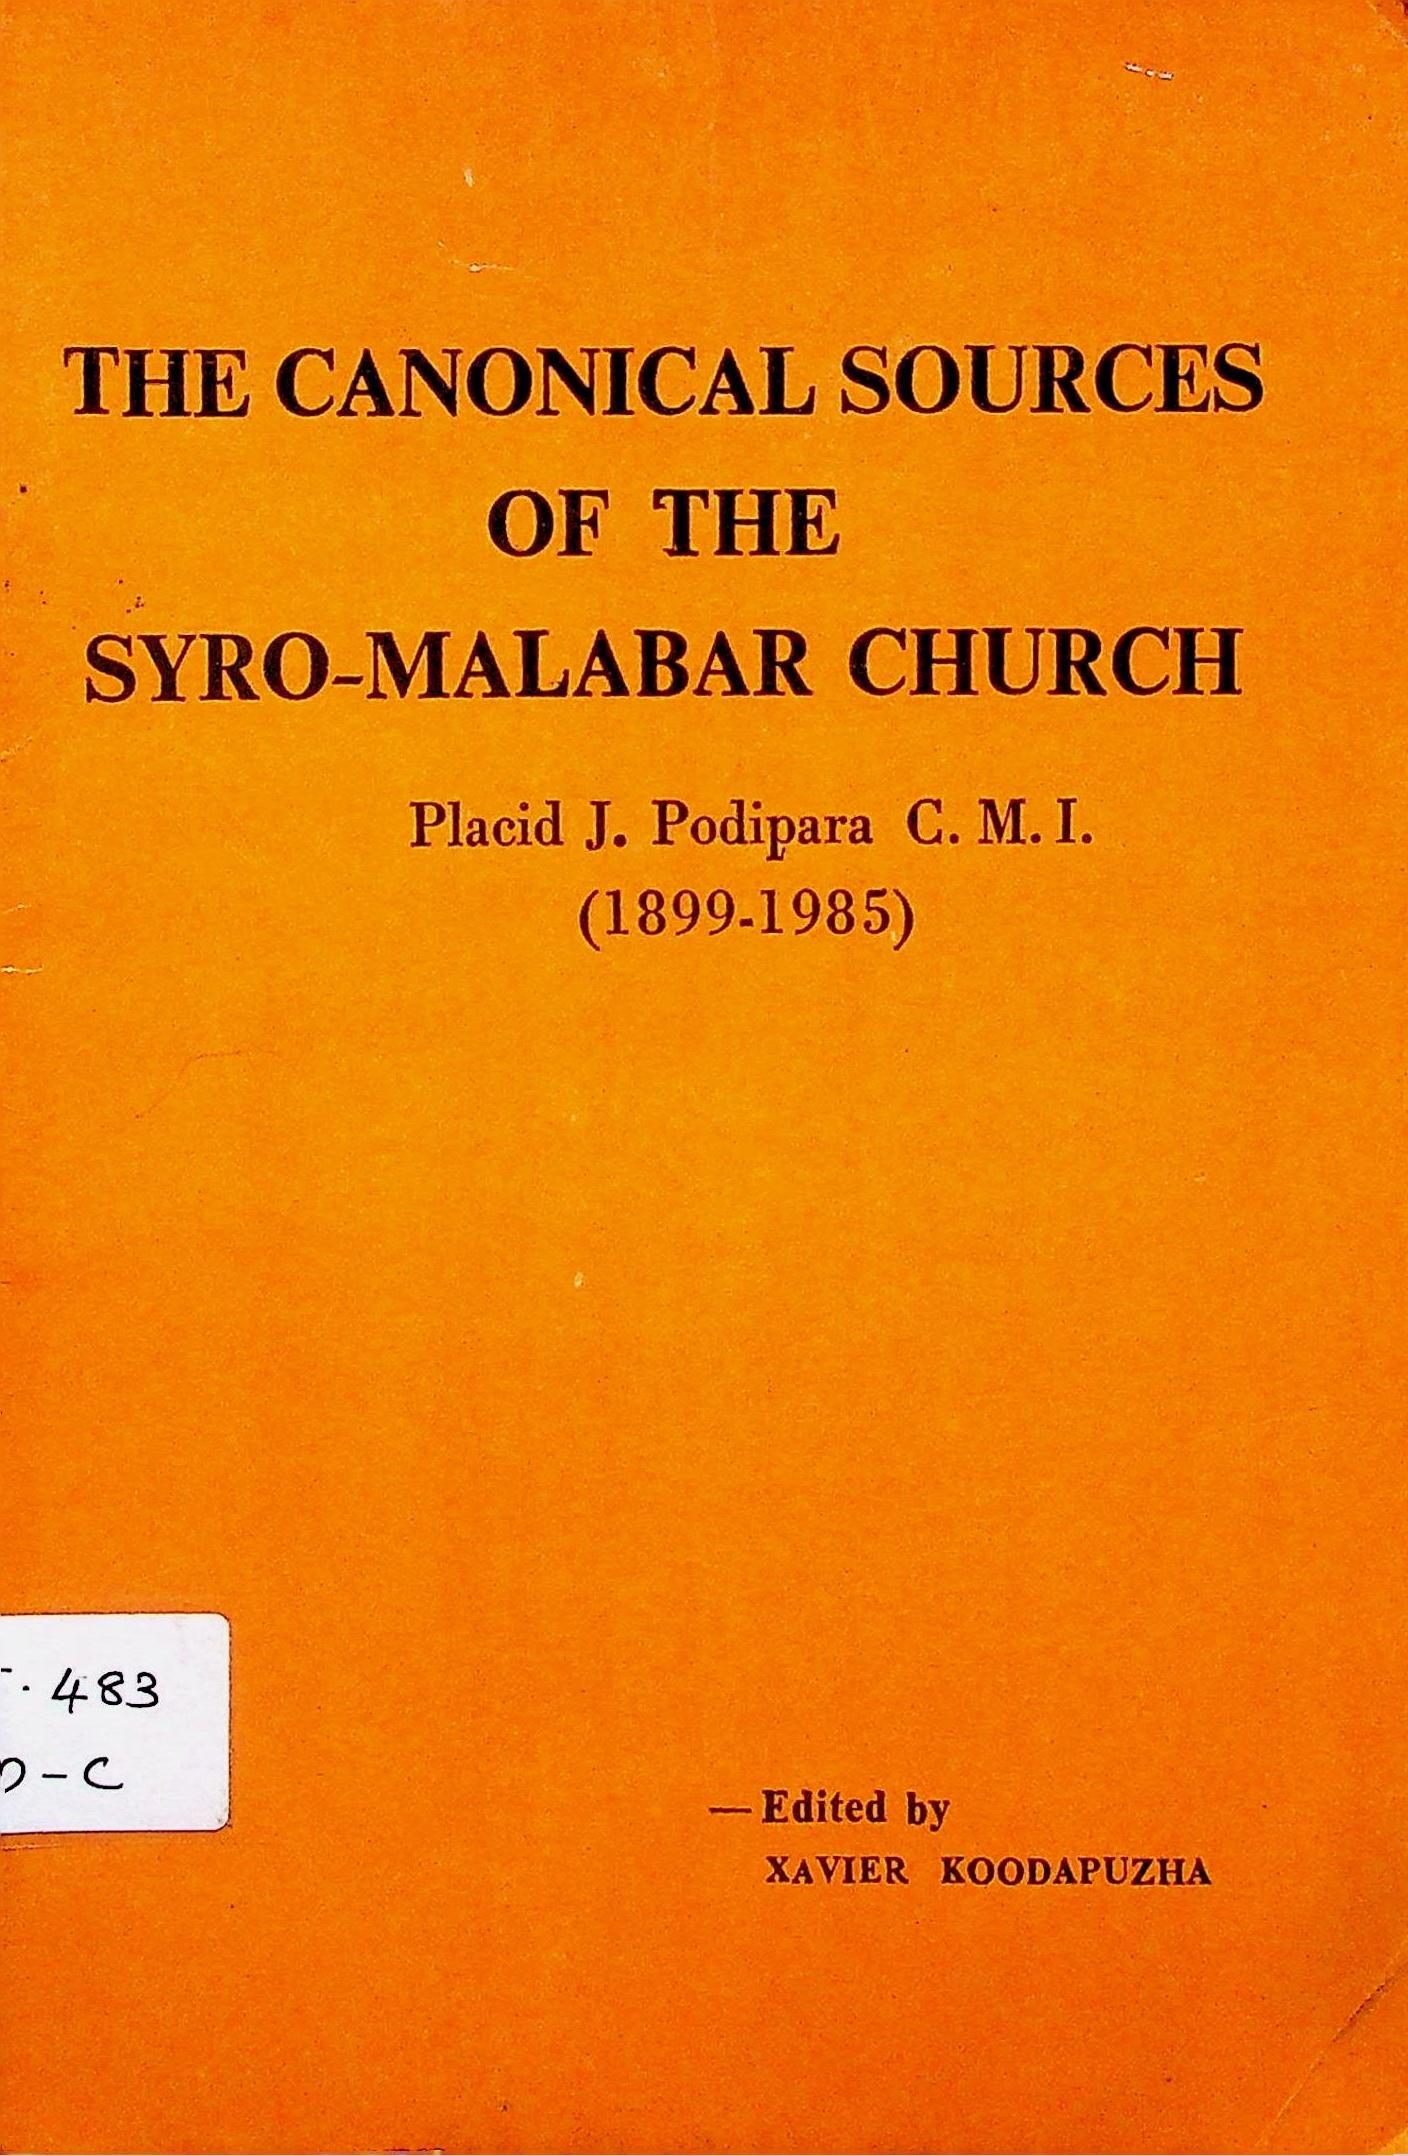 Canonical Sources of the Syro-Malabar Church